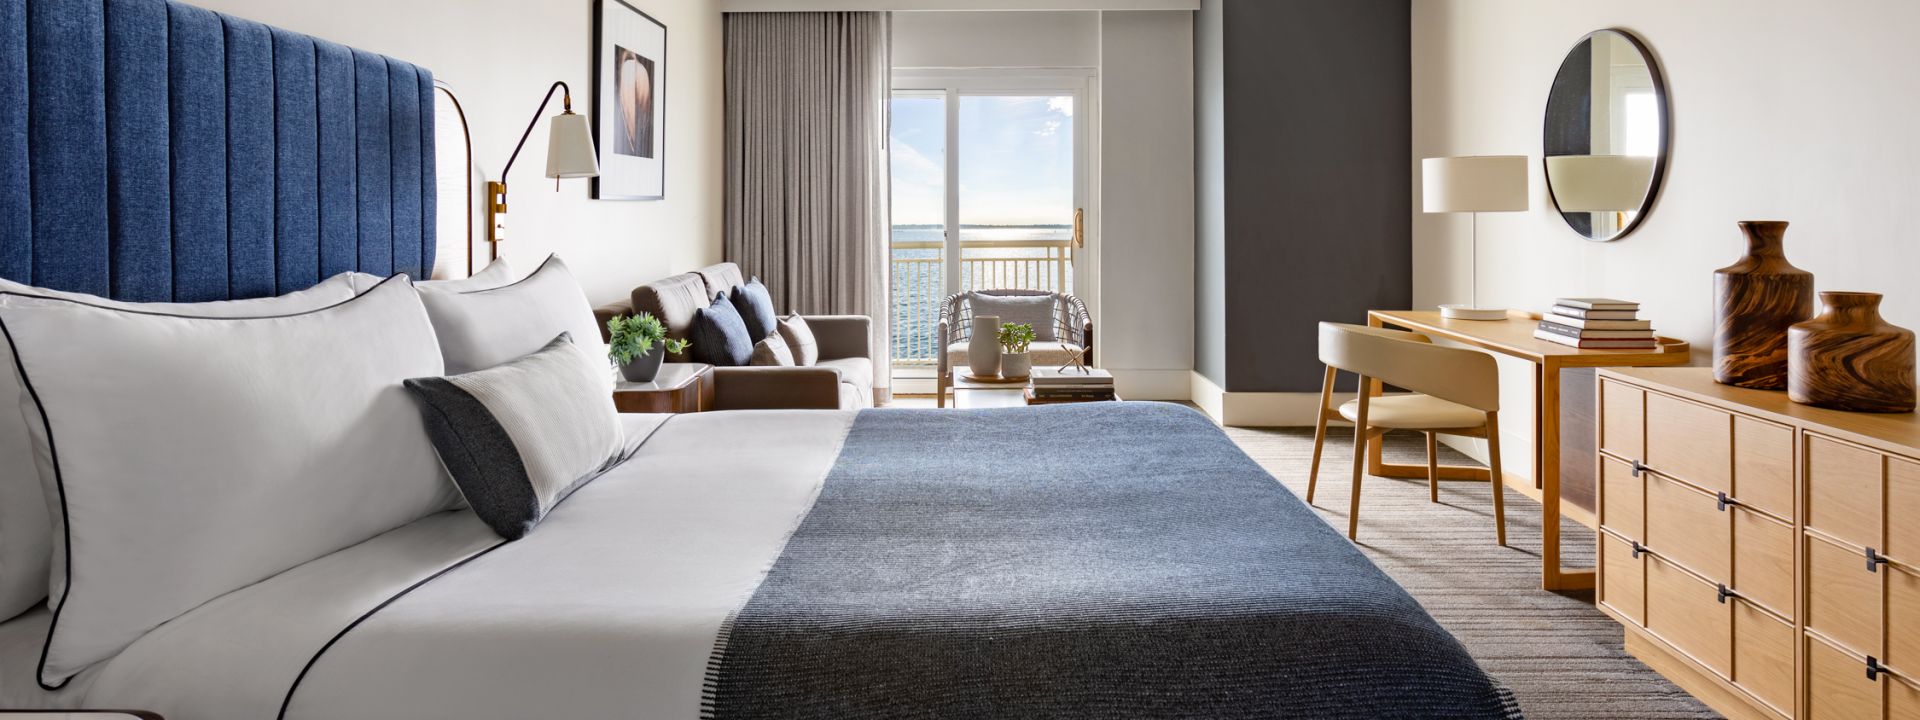 A modern hotel suite with a king bed and an ocean view.